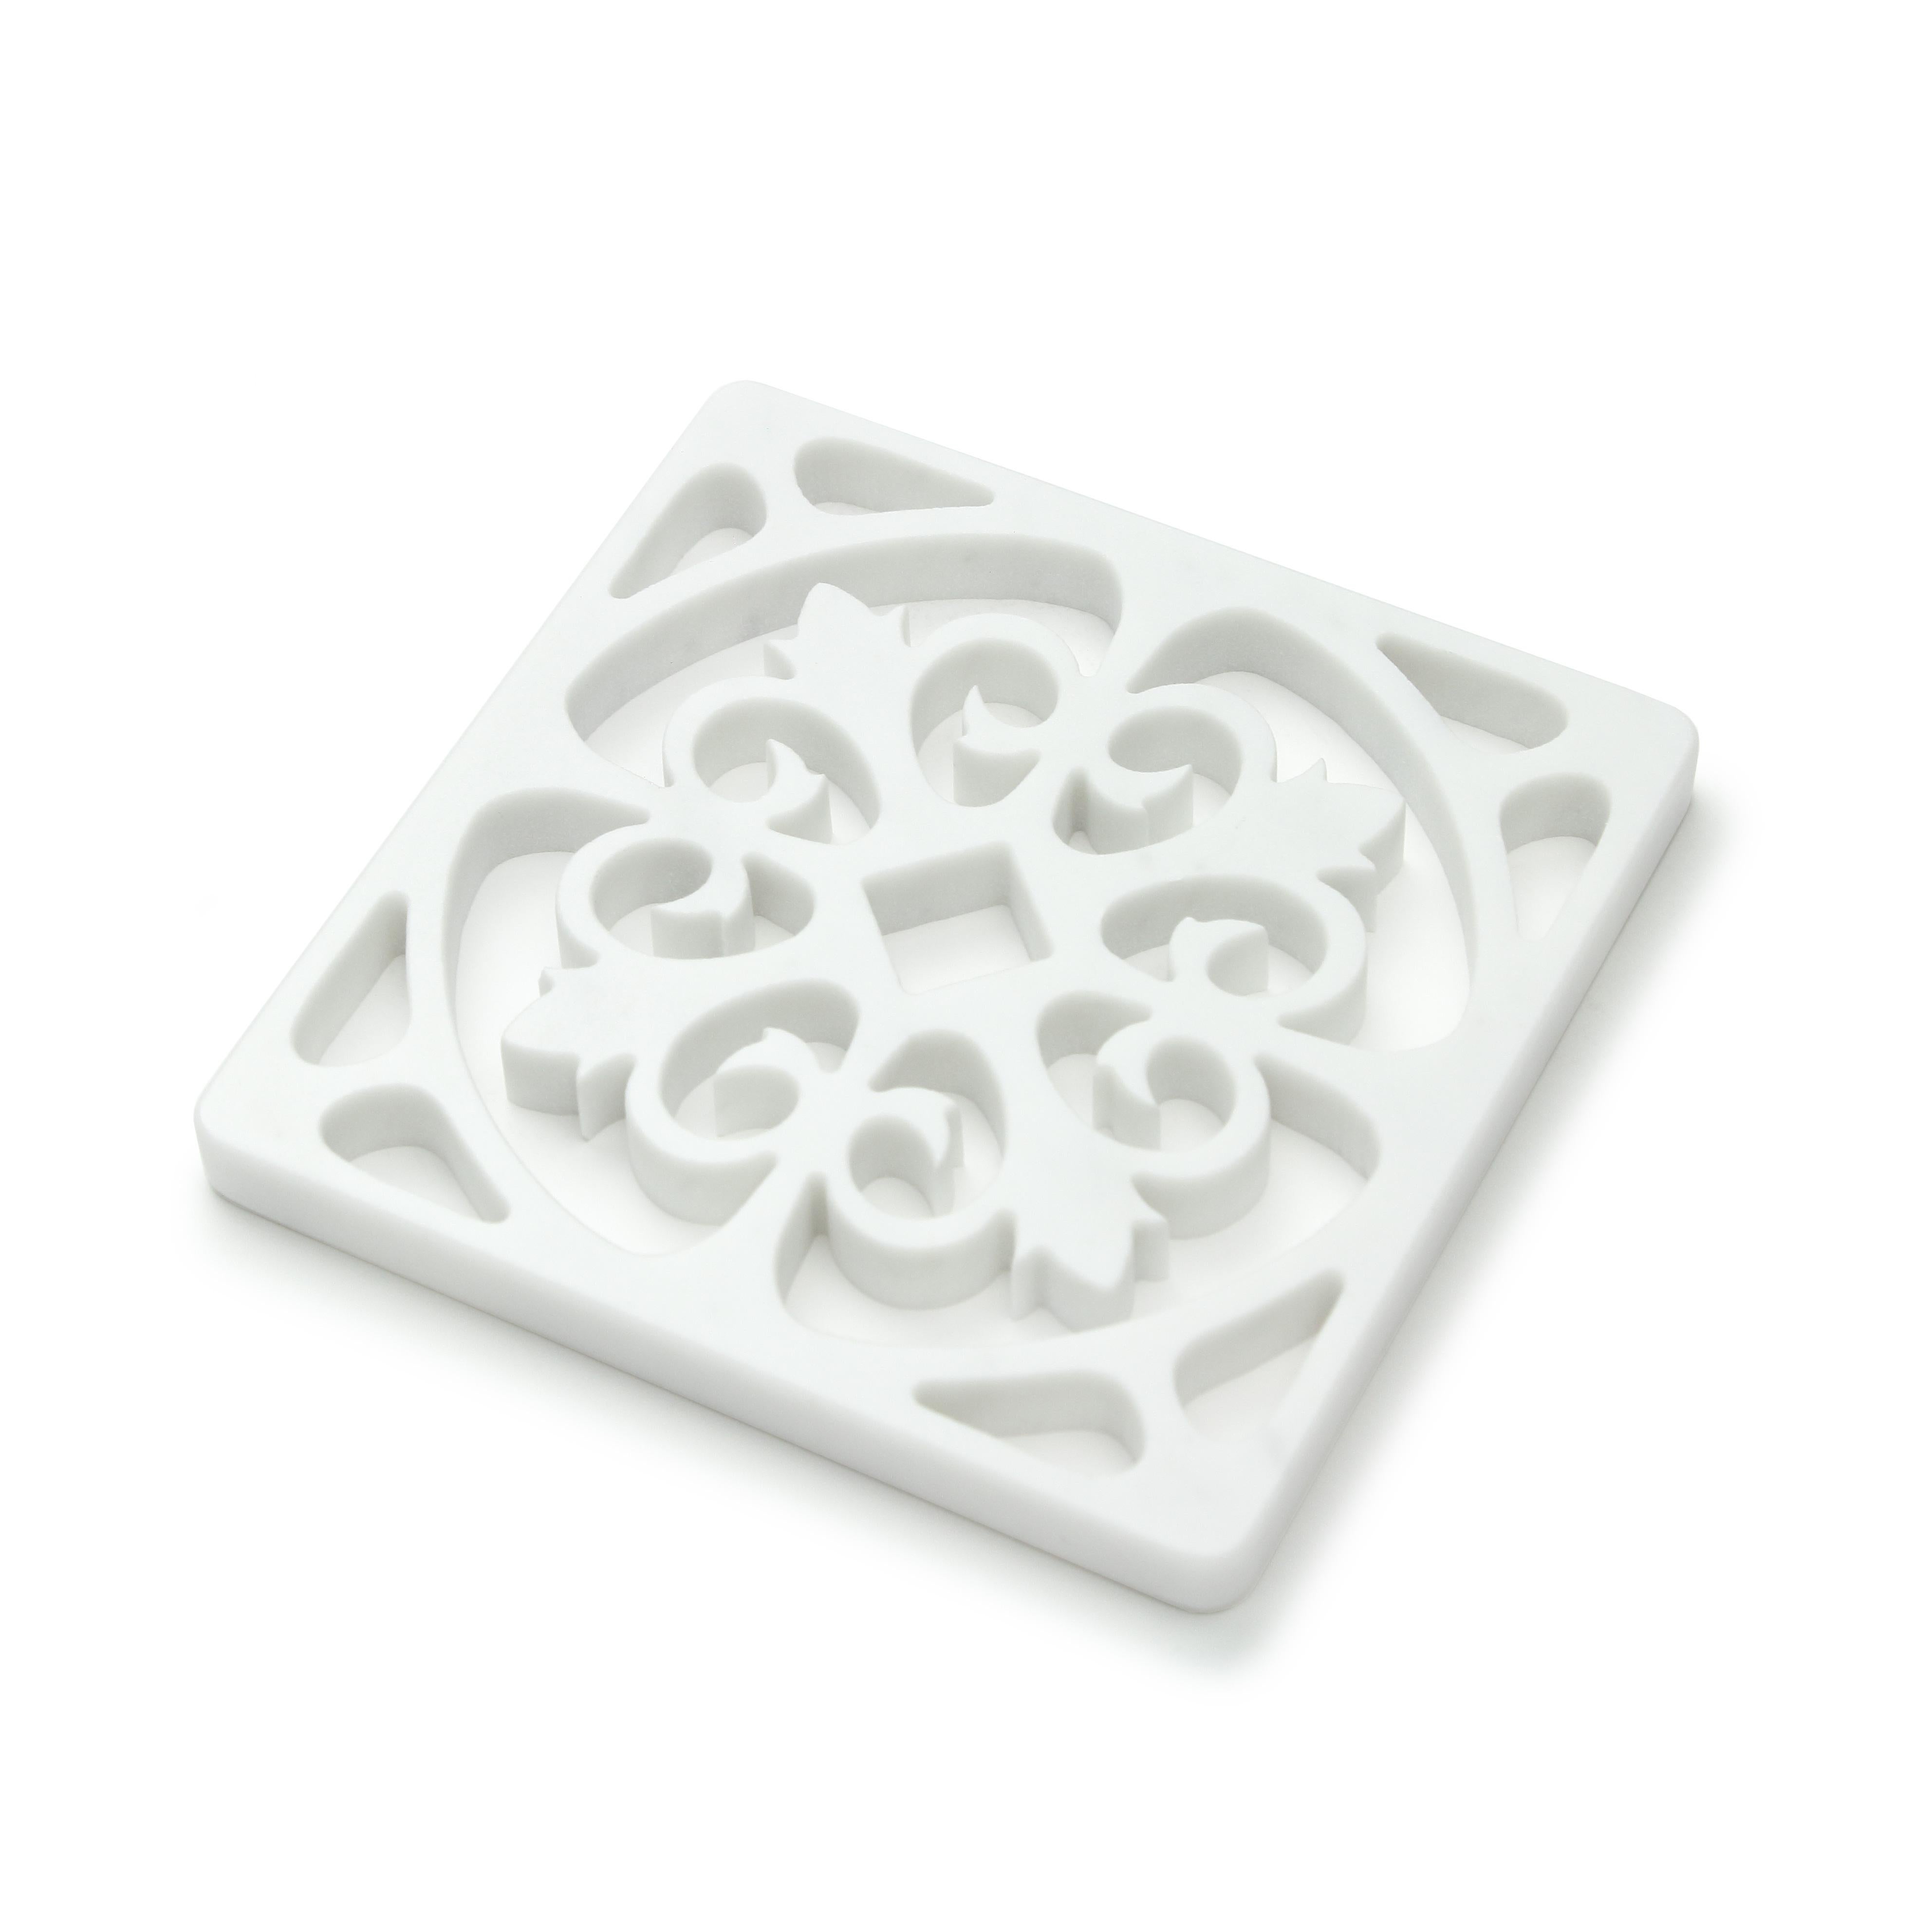 The Amalfi coaster inspired by the pattern of Majolica tiles represents all the Mediterranean flavor made of sea, sun, lemons and carefree laughter.
Coaster in polished White Carrara marble from Italy.
Thanks to their shape and size they can be used